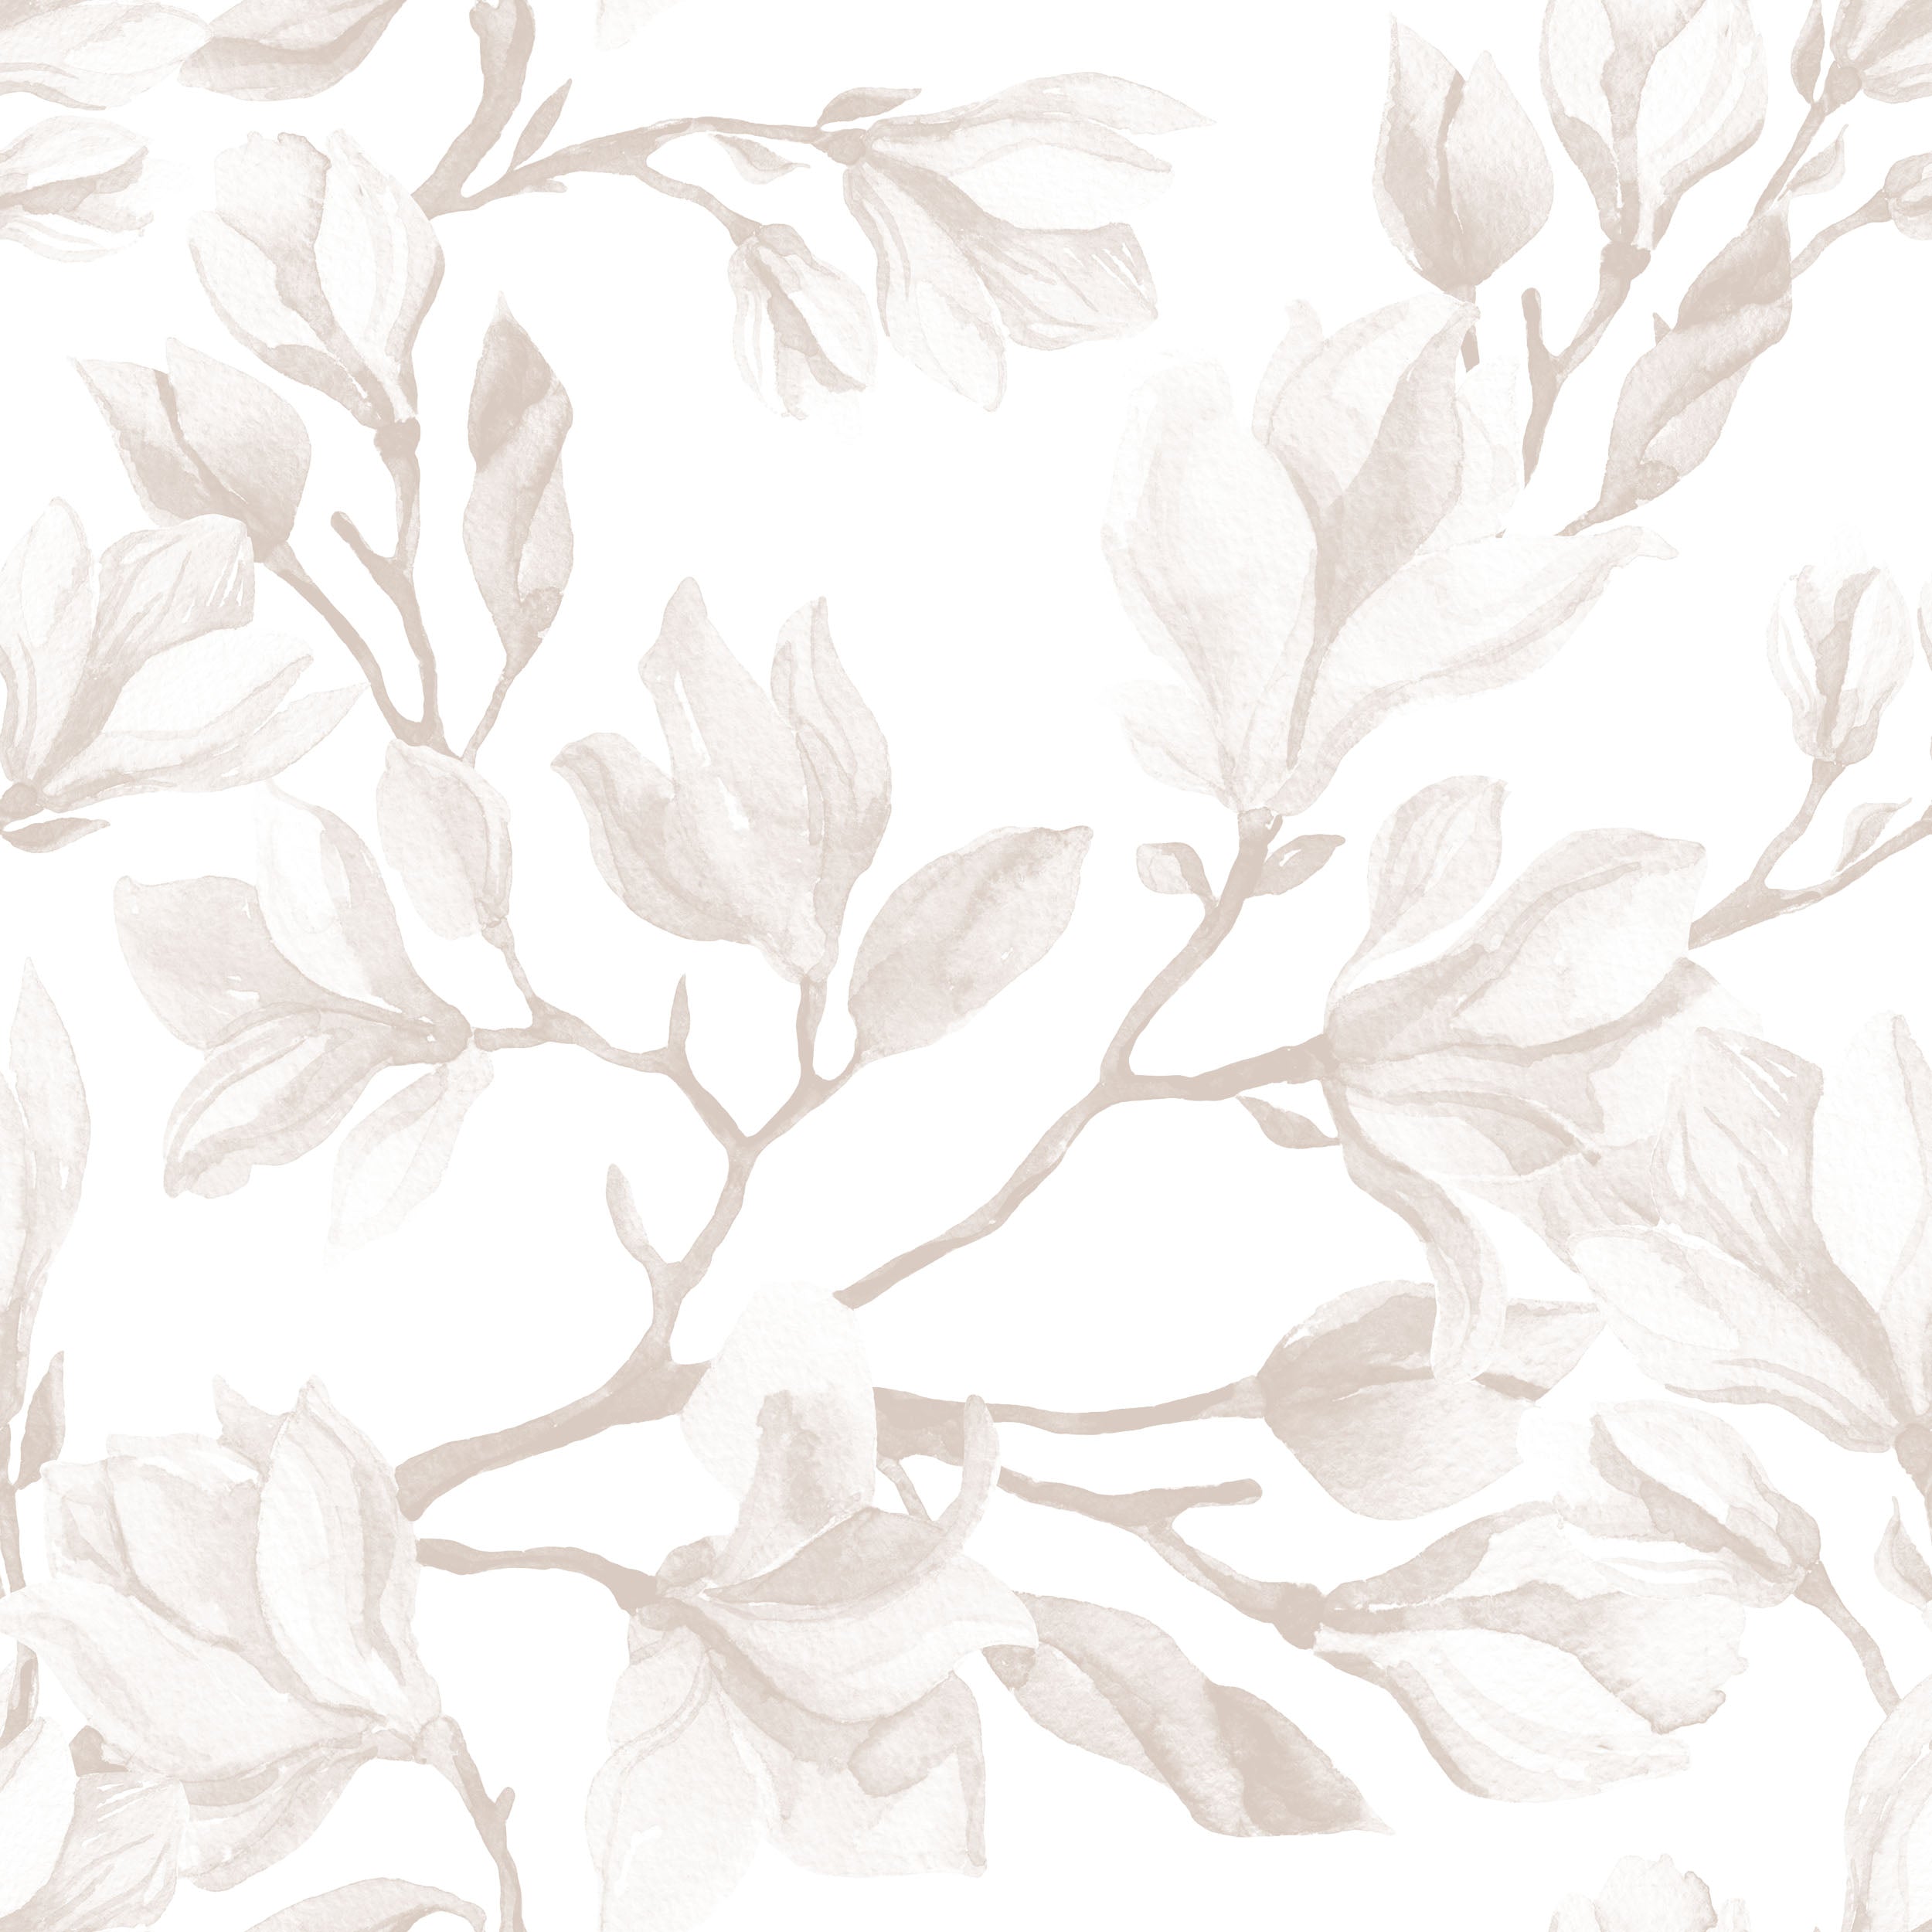 A close-up view of the 'Blooming Magnolia Wallpaper', showcasing the detailed and delicate magnolia branch illustrations, lending an elegant and natural touch to the wall with its soft linen texture.